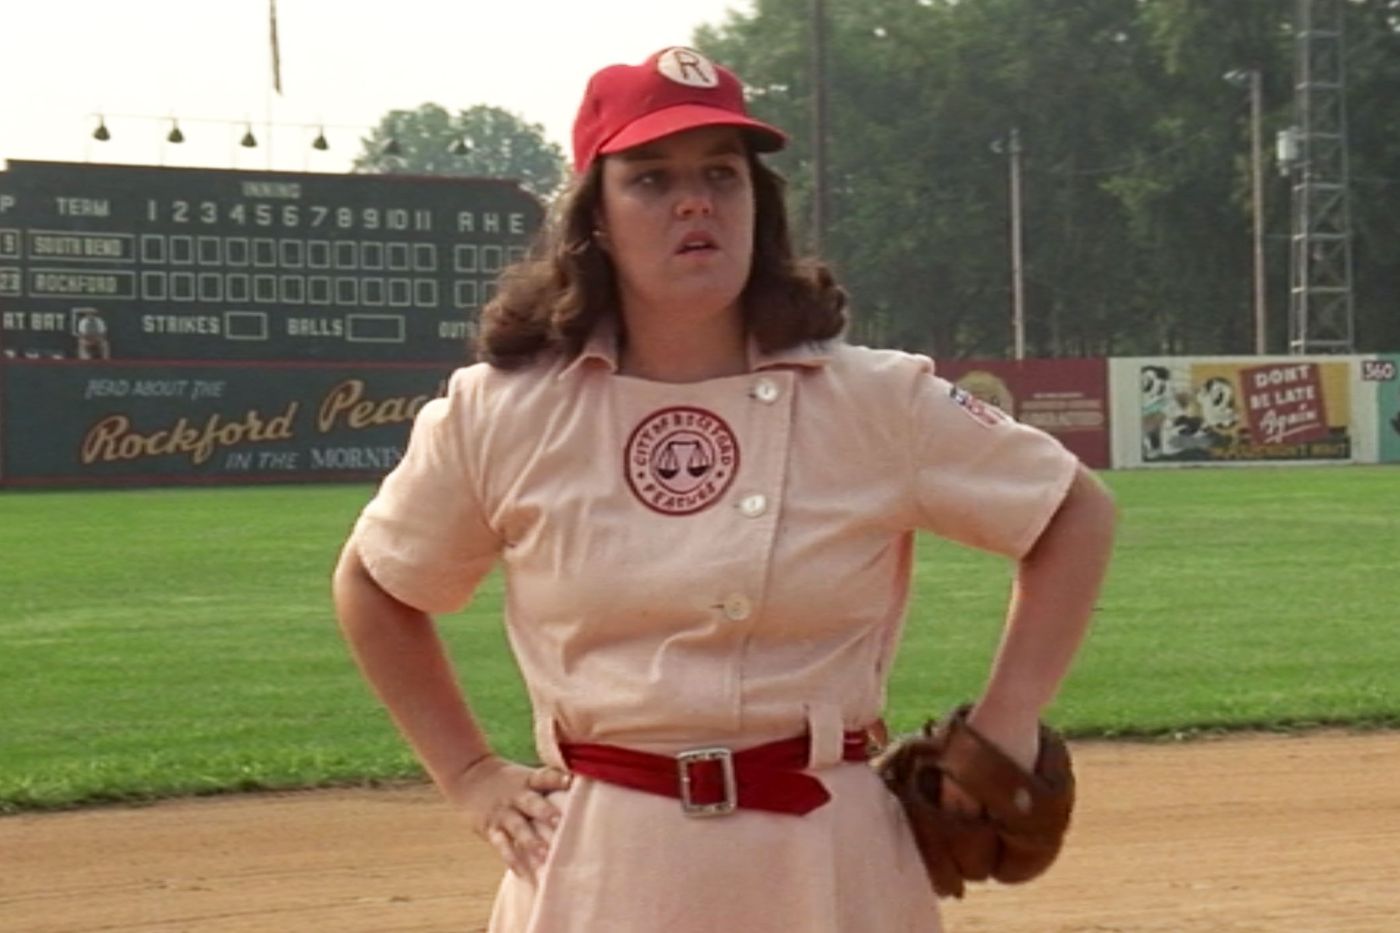 TBT: A League of Their Own (1992) – Frock Flicks